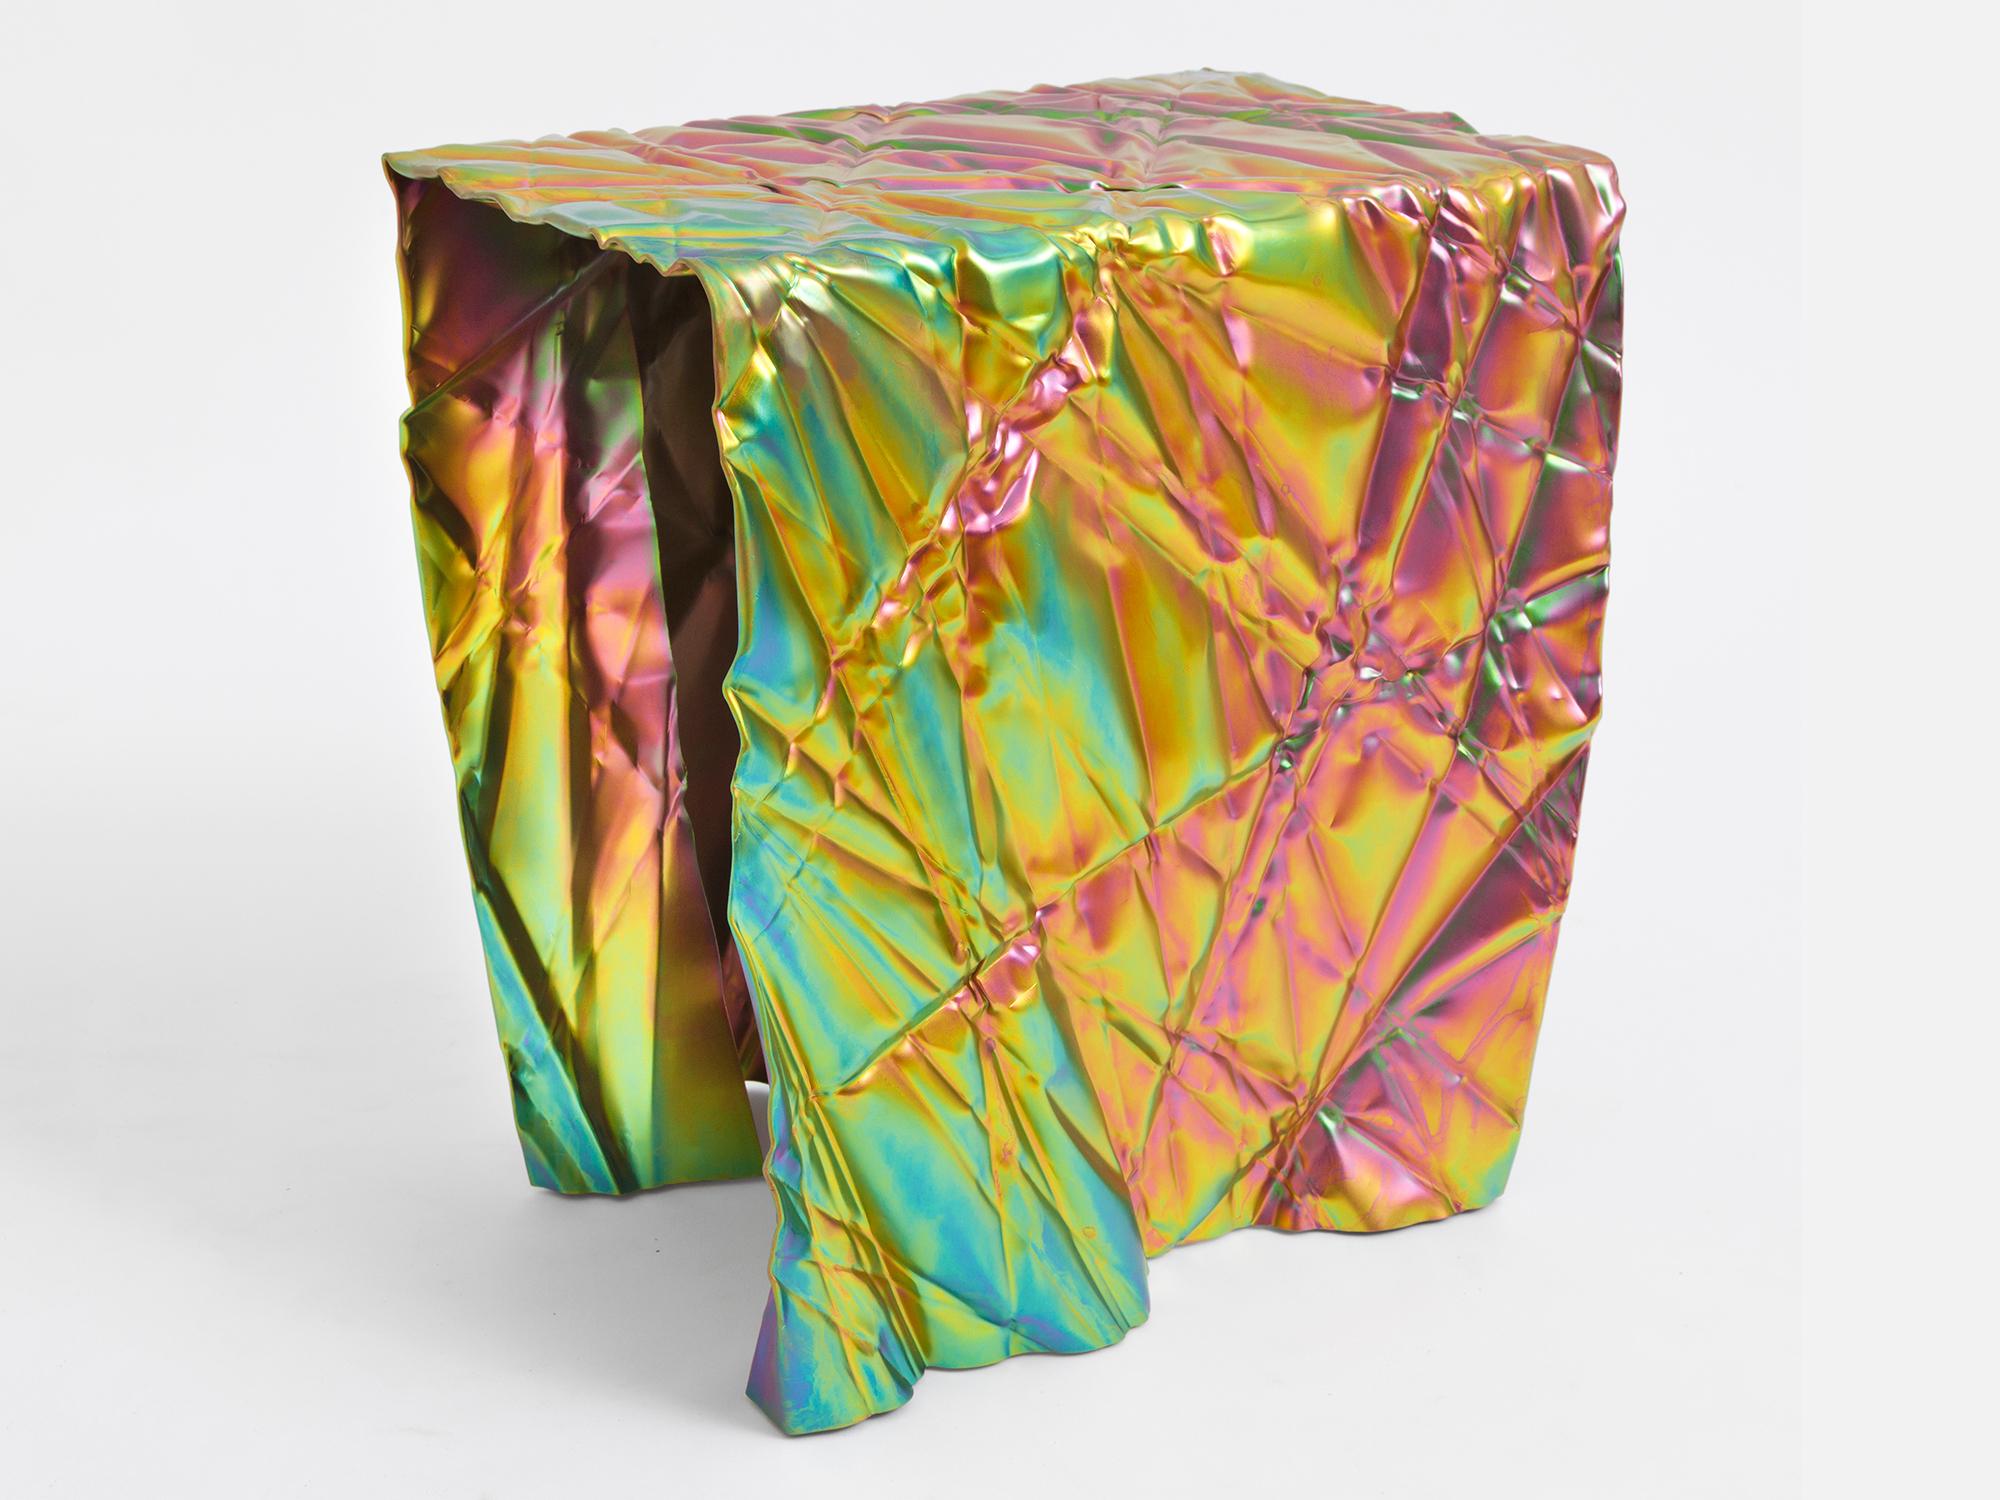 Wrinkled stool or side table by Omaha-based designer Christopher Prinz, who achieves this unusual texture by repeatedly creasing a thin sheet of steel, resulting in a strong, rigid, and unique form. Hidden leveling feet protect surfaces and ensure